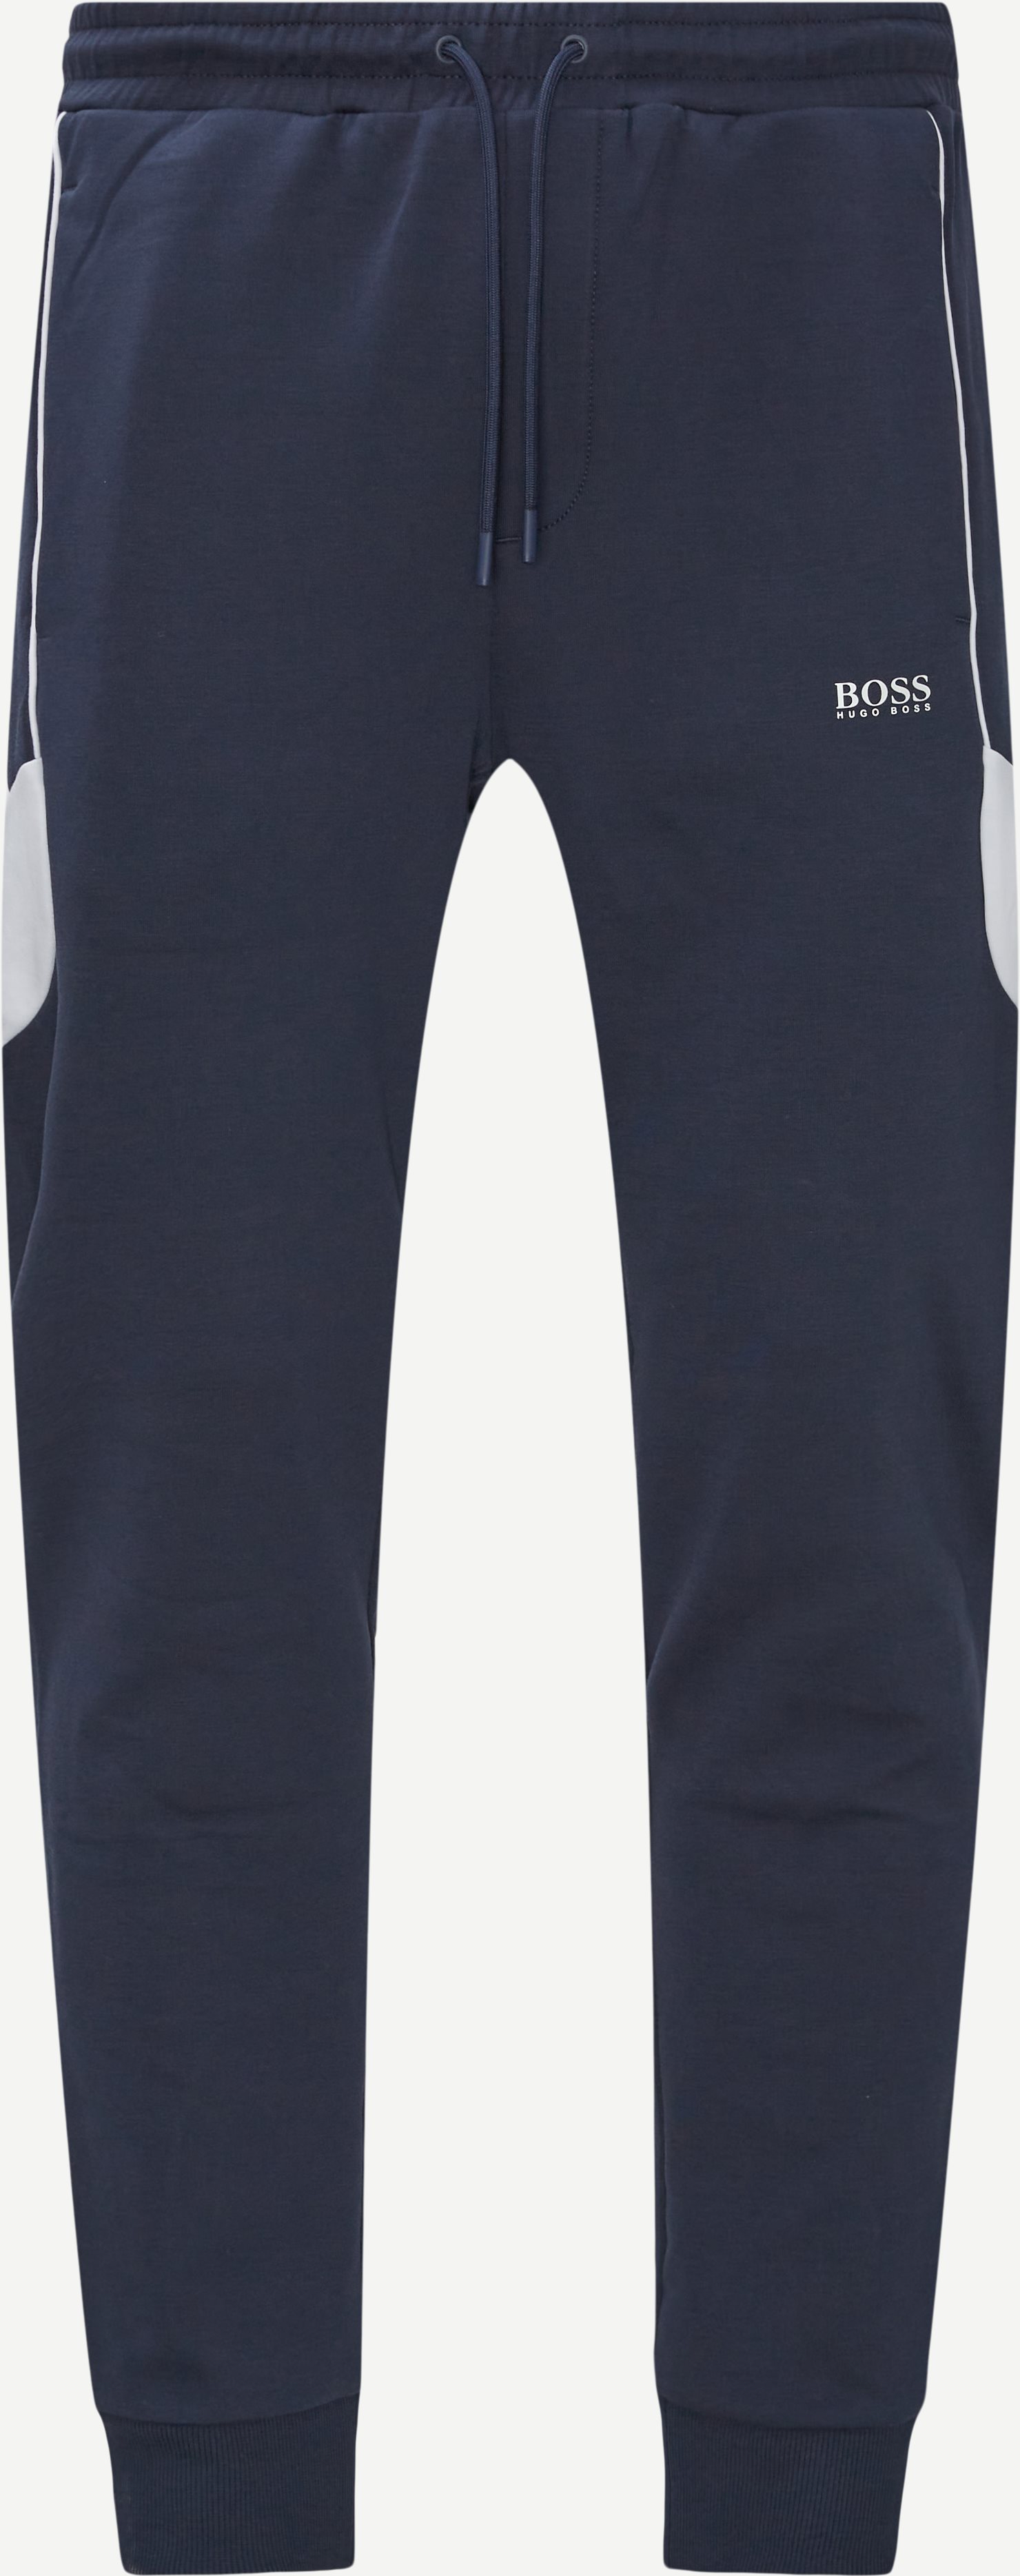 BOSS Athleisure Trousers 50452855 TRACK PANTS Blue